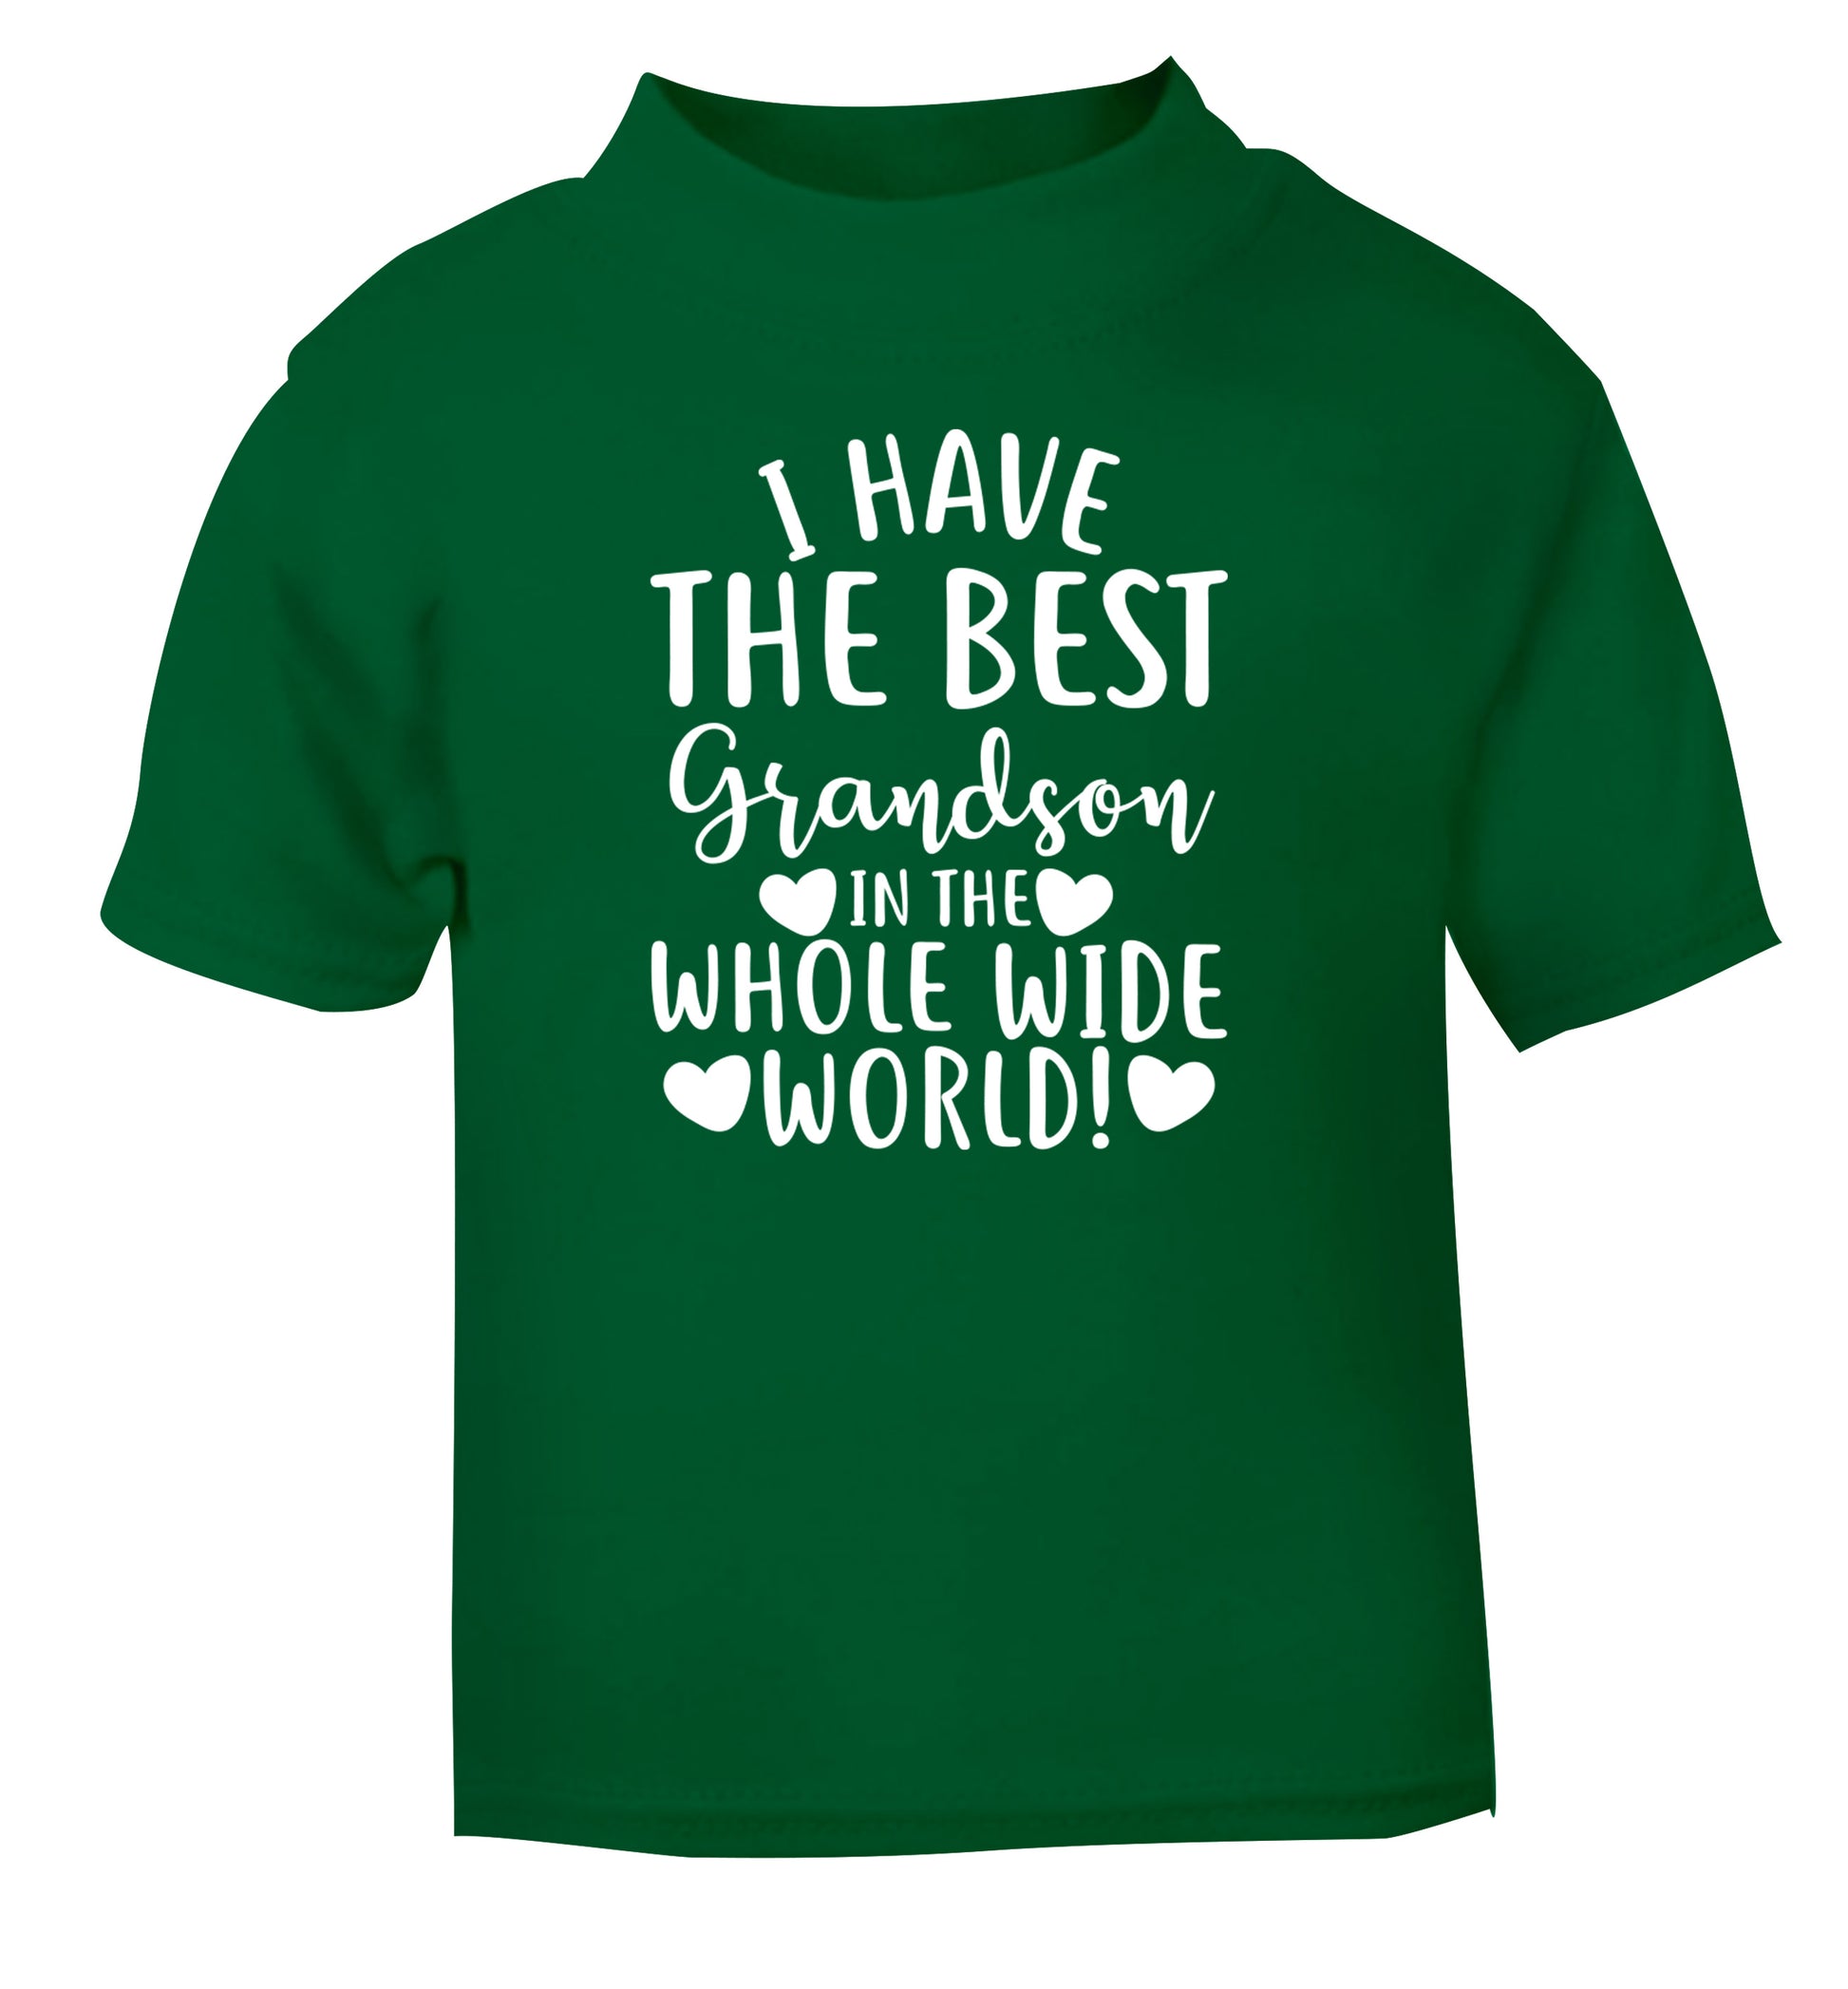 I have the best grandson in the whole wide world! green Baby Toddler Tshirt 2 Years